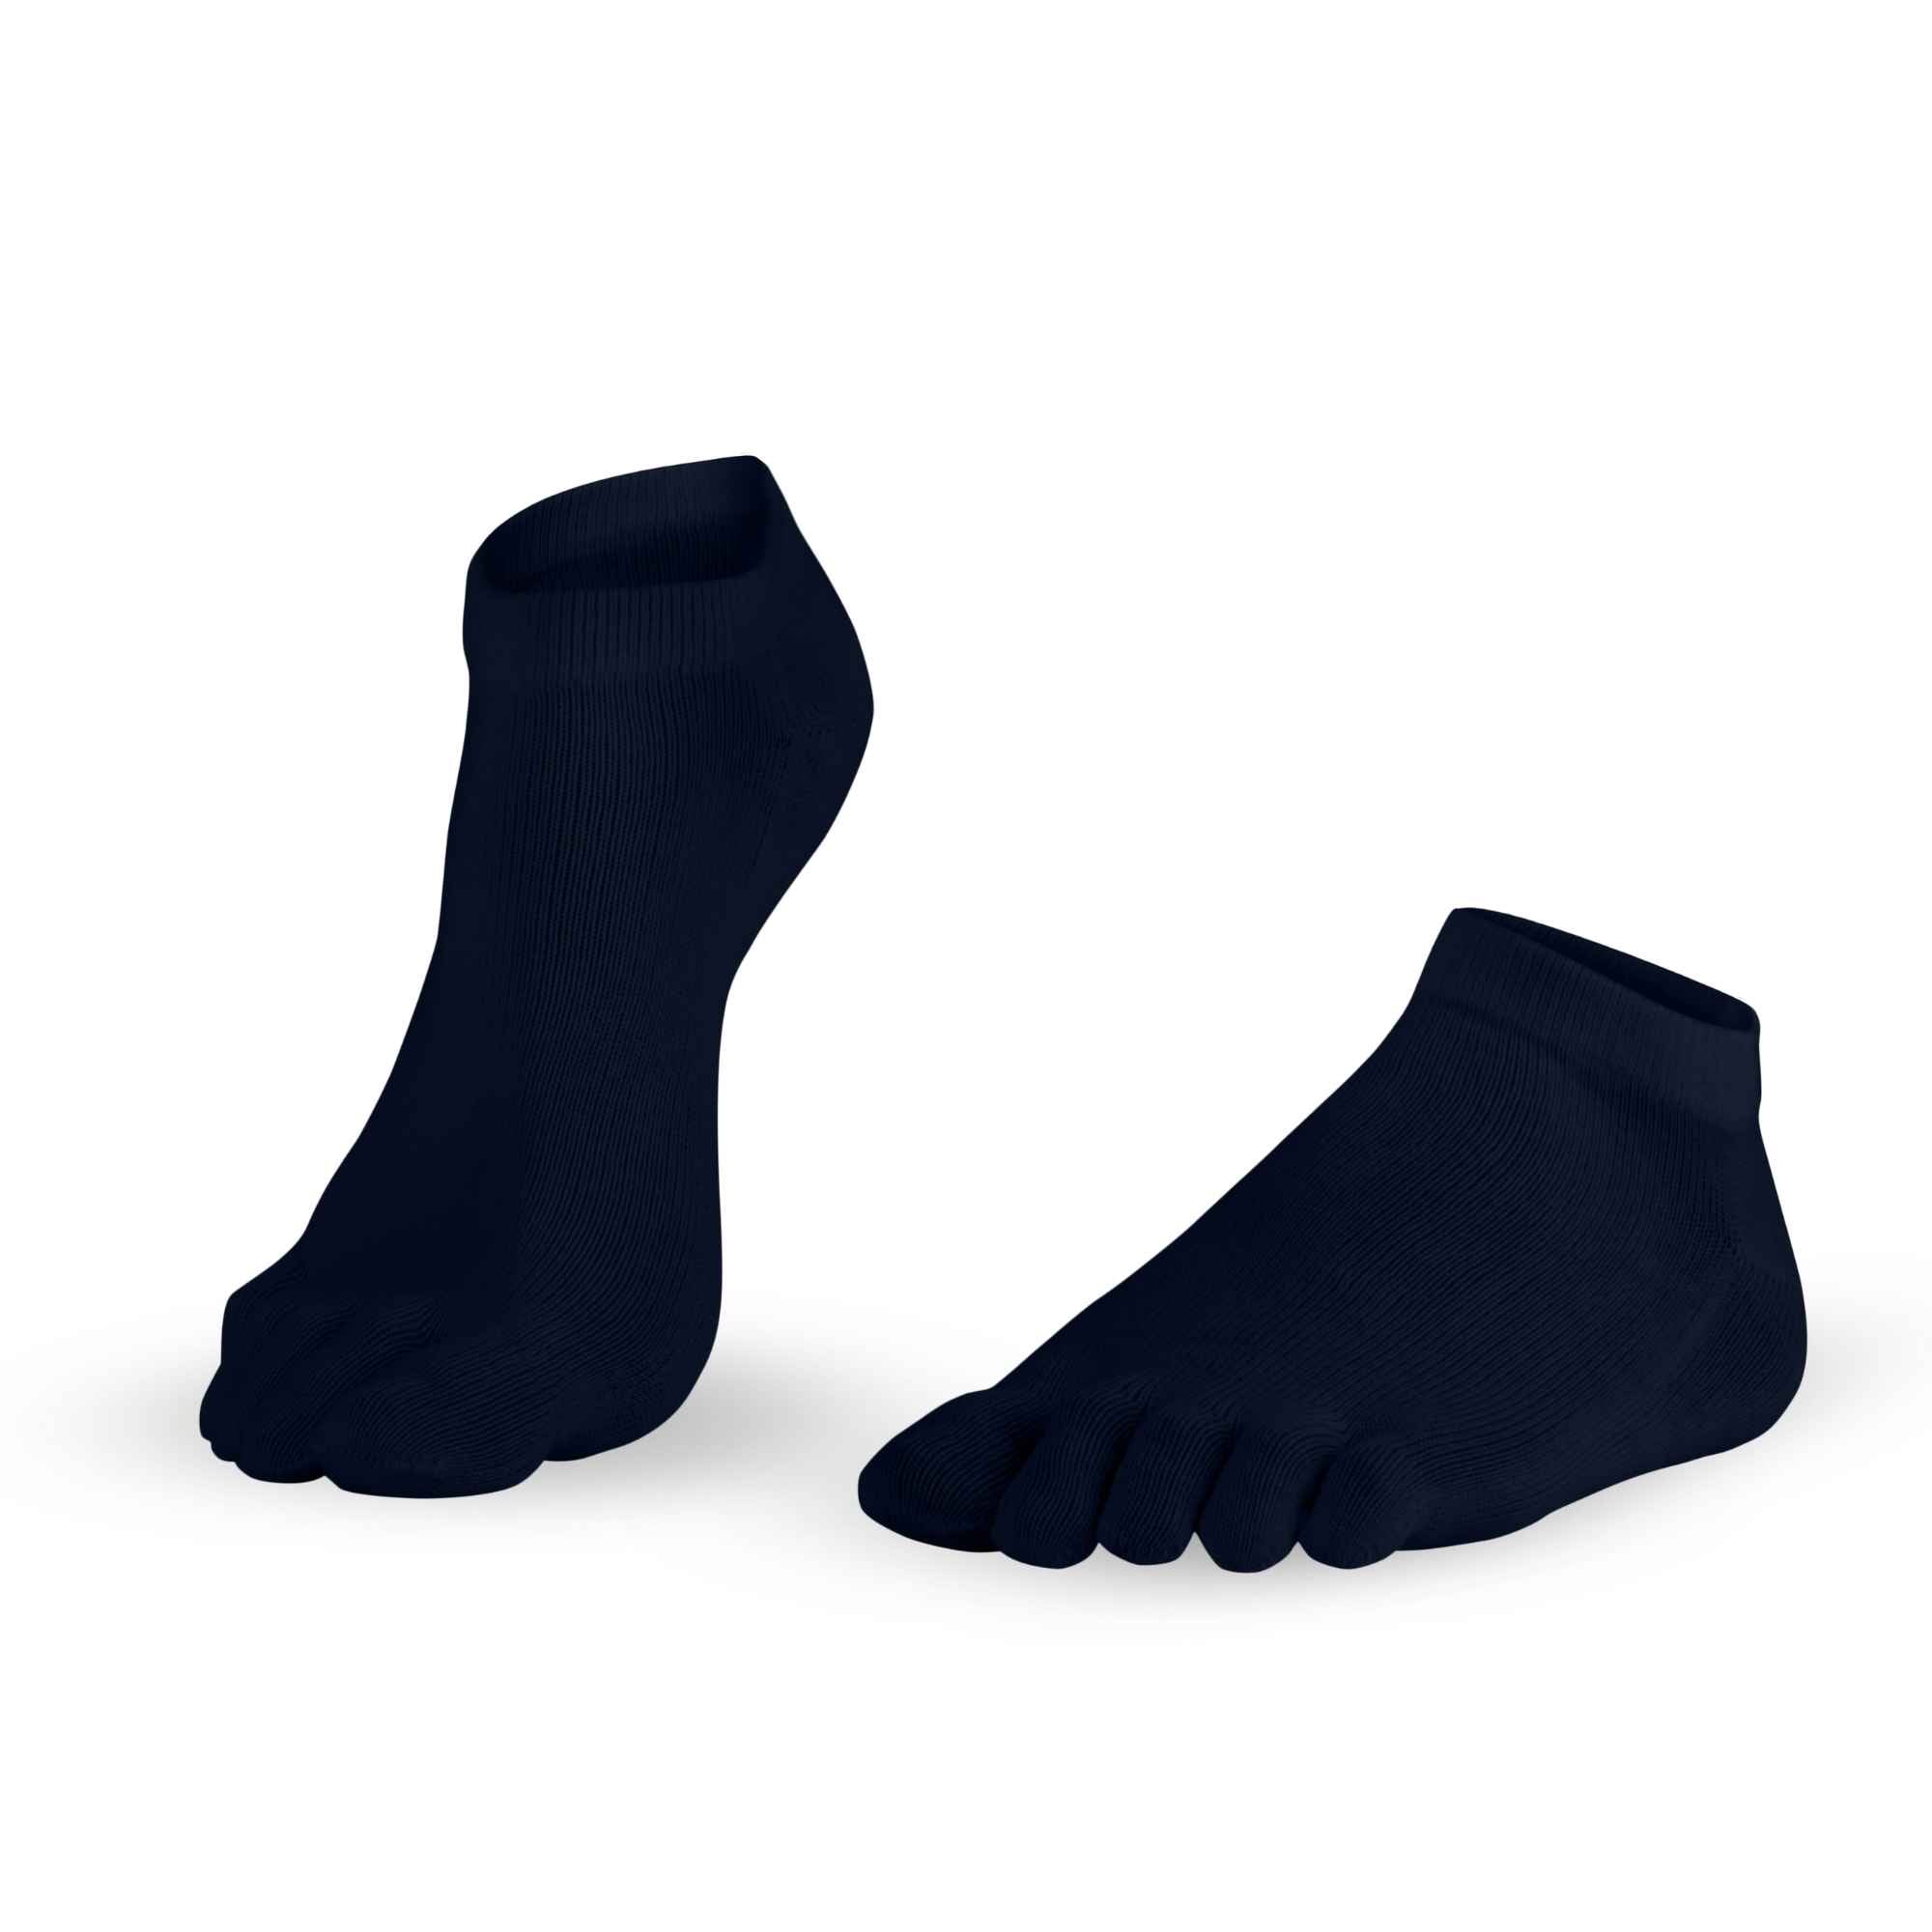 Diagram for Dr. Foot Silver Protect Sneaker- anti-microbial toe socks from Knitido, in navy